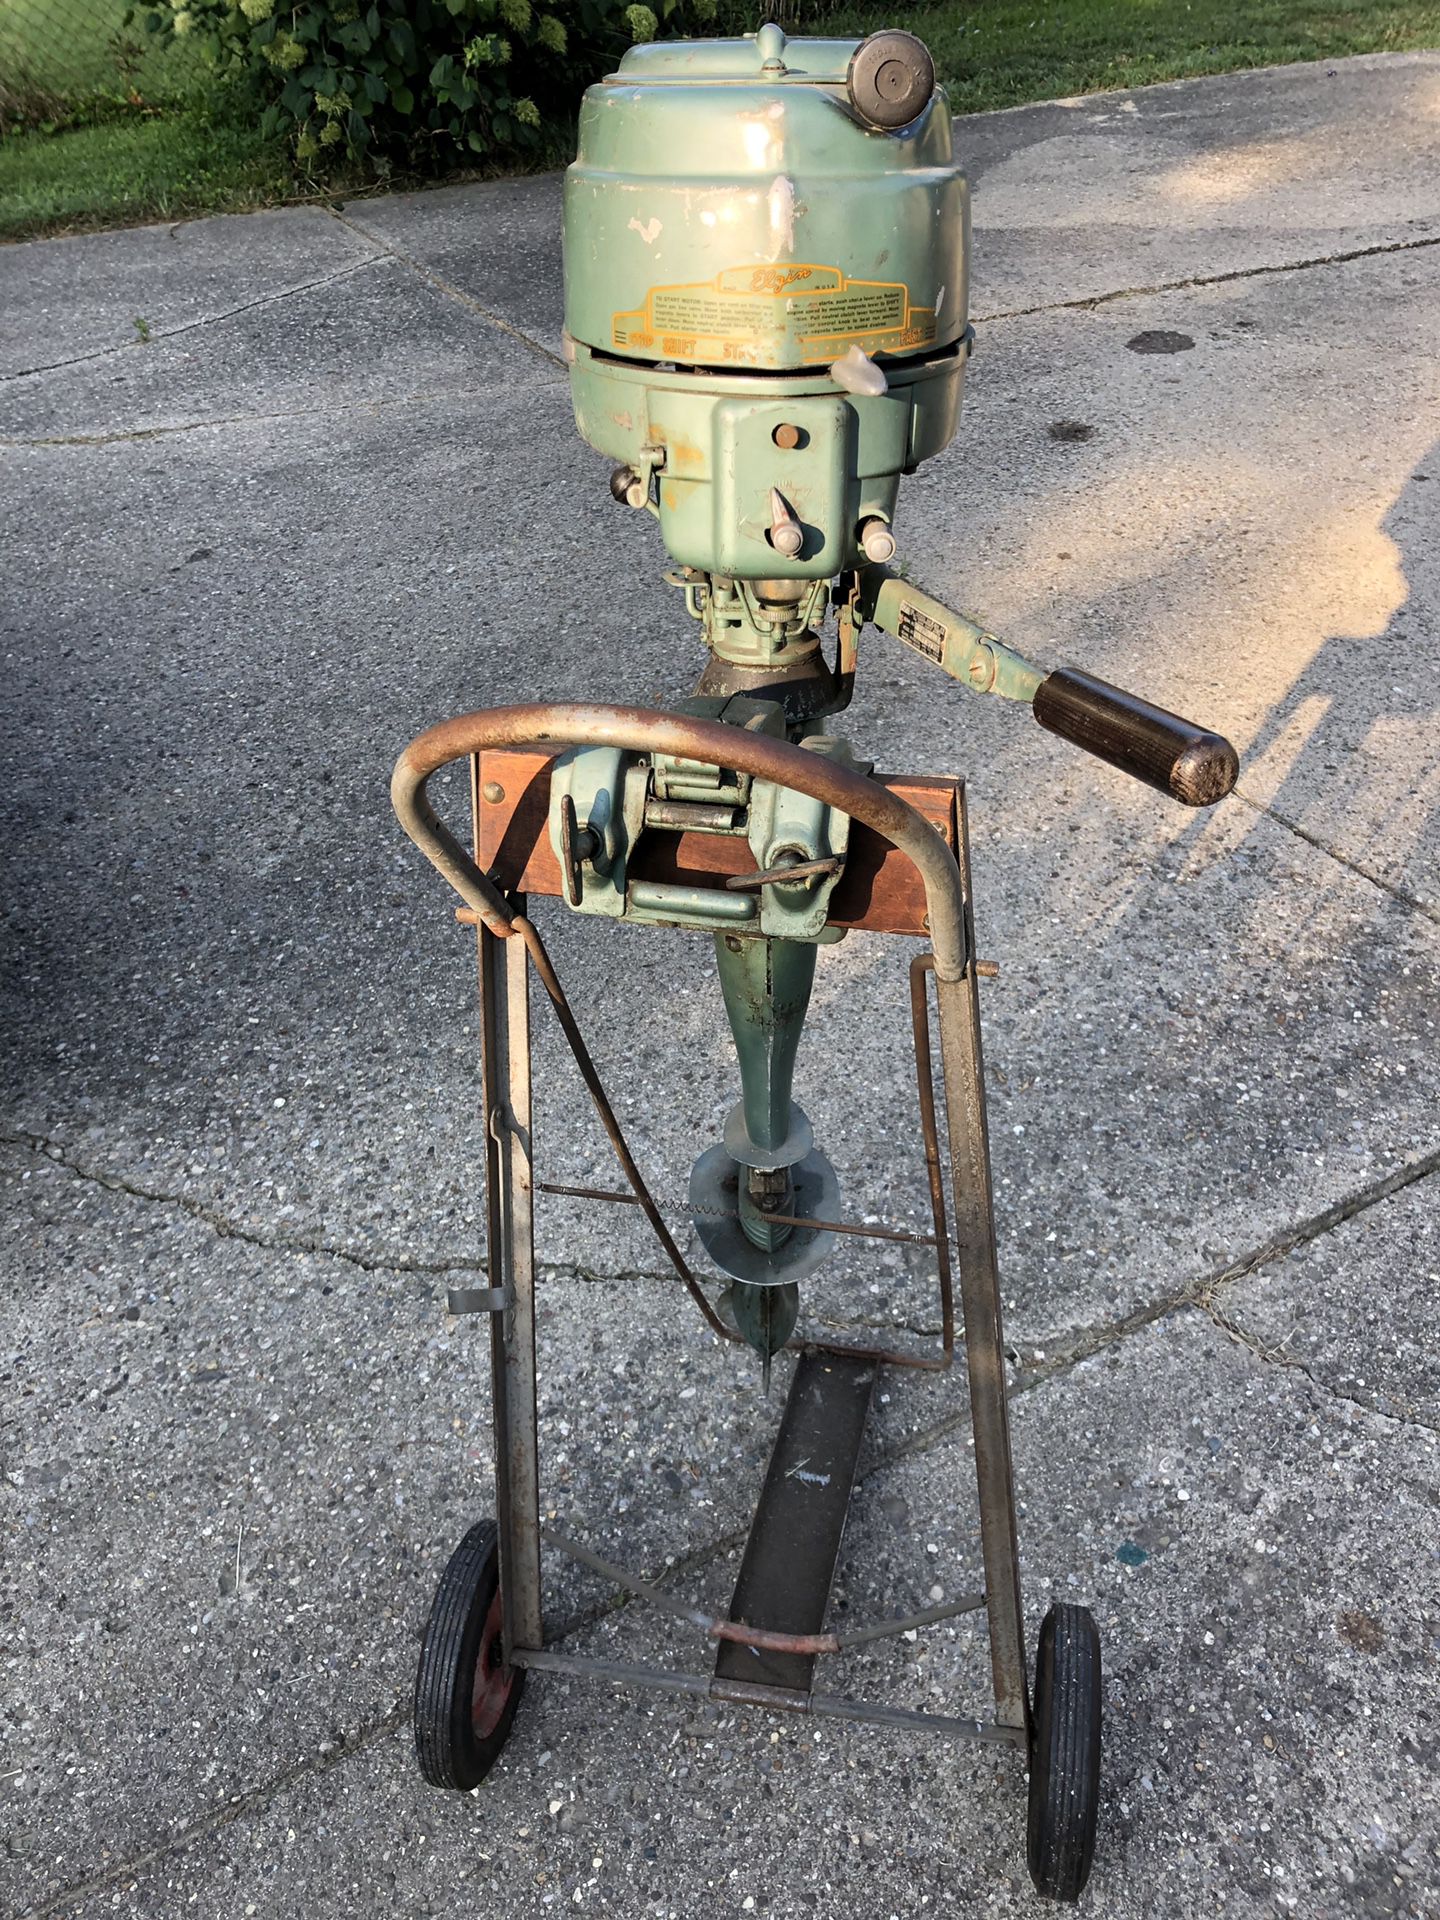 Antique Elgin outboard motor and stand. 7 1/2 hp. Ran great when last used. Stored inside.